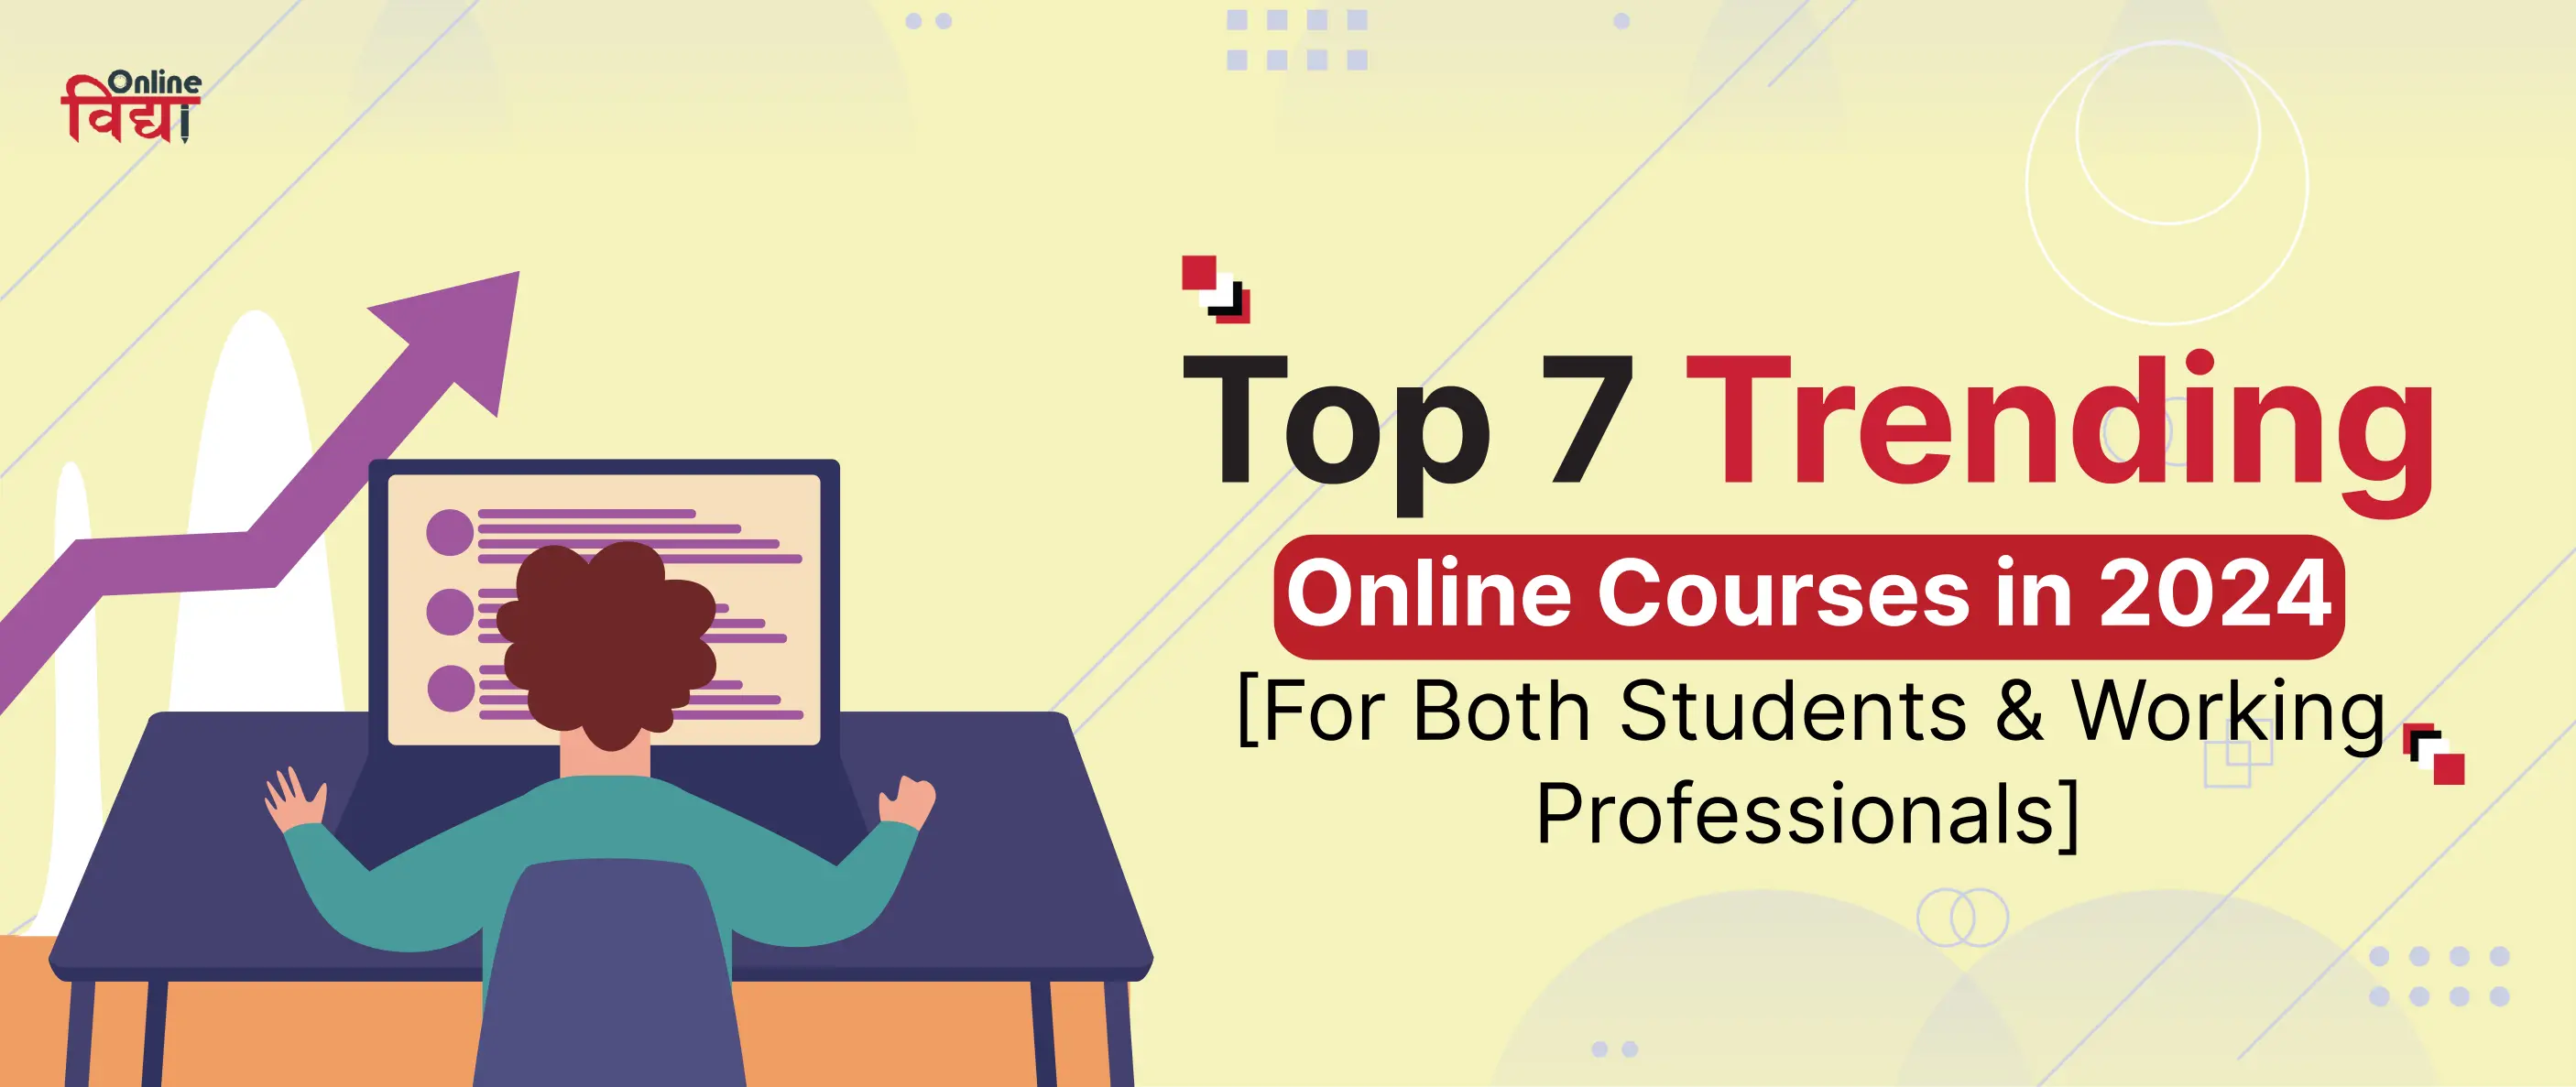 Top 7 Trending Online Courses in 2024 [For Both Students & Working Professionals]